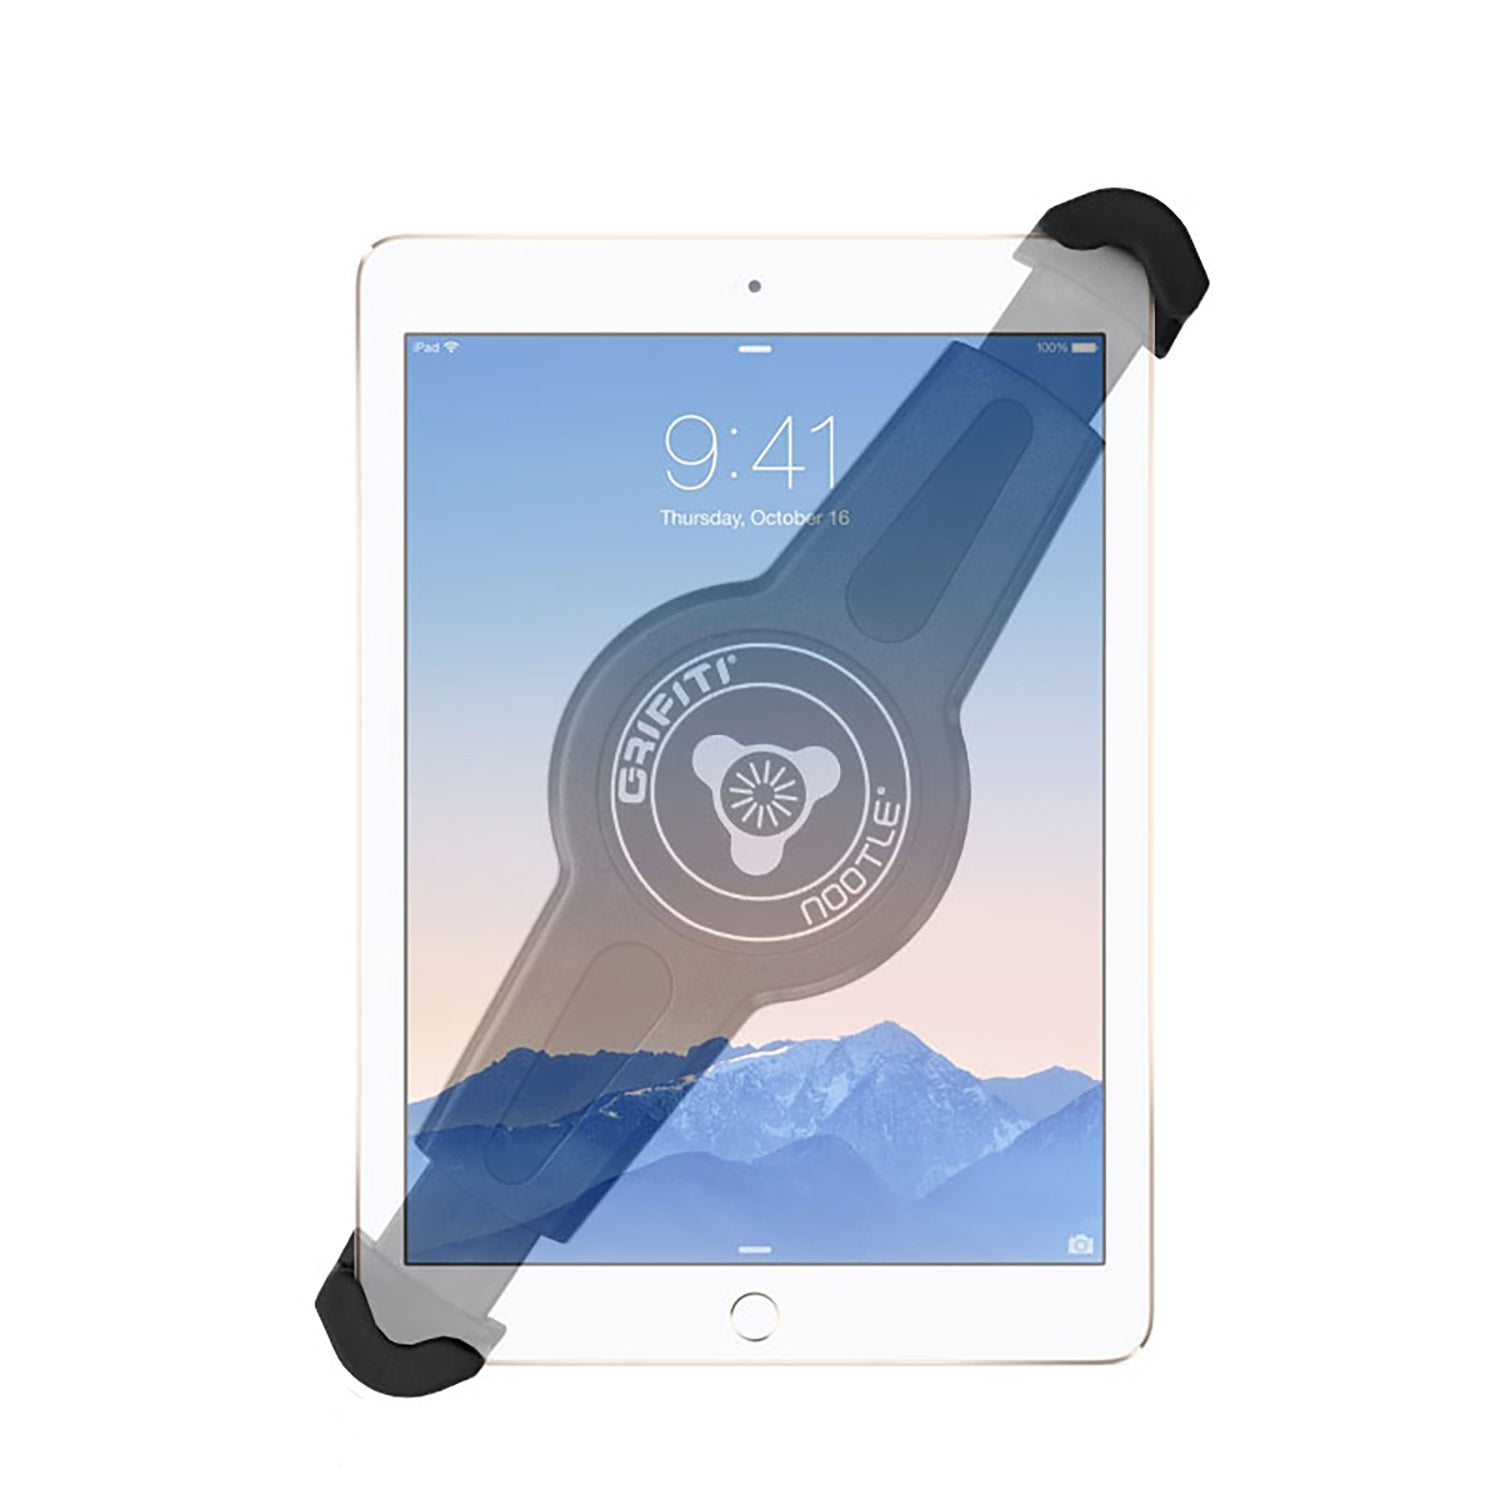 Grifiti Nootle Universal Tablet Mount Small to Standard iPads and Tablets - Grifiti